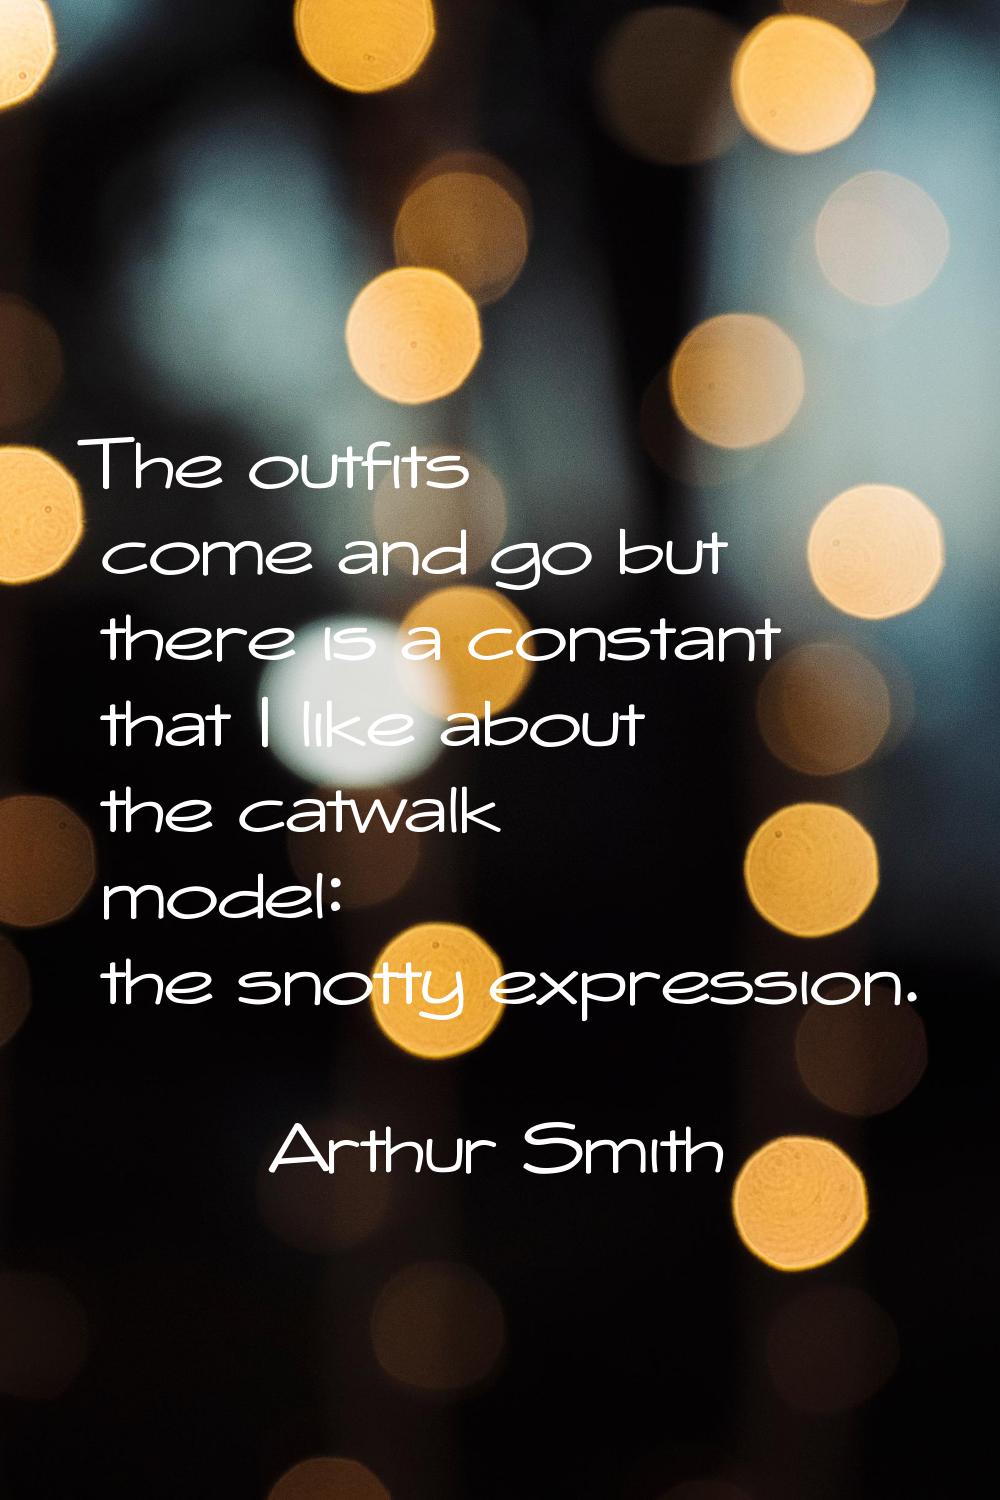 The outfits come and go but there is a constant that I like about the catwalk model: the snotty exp